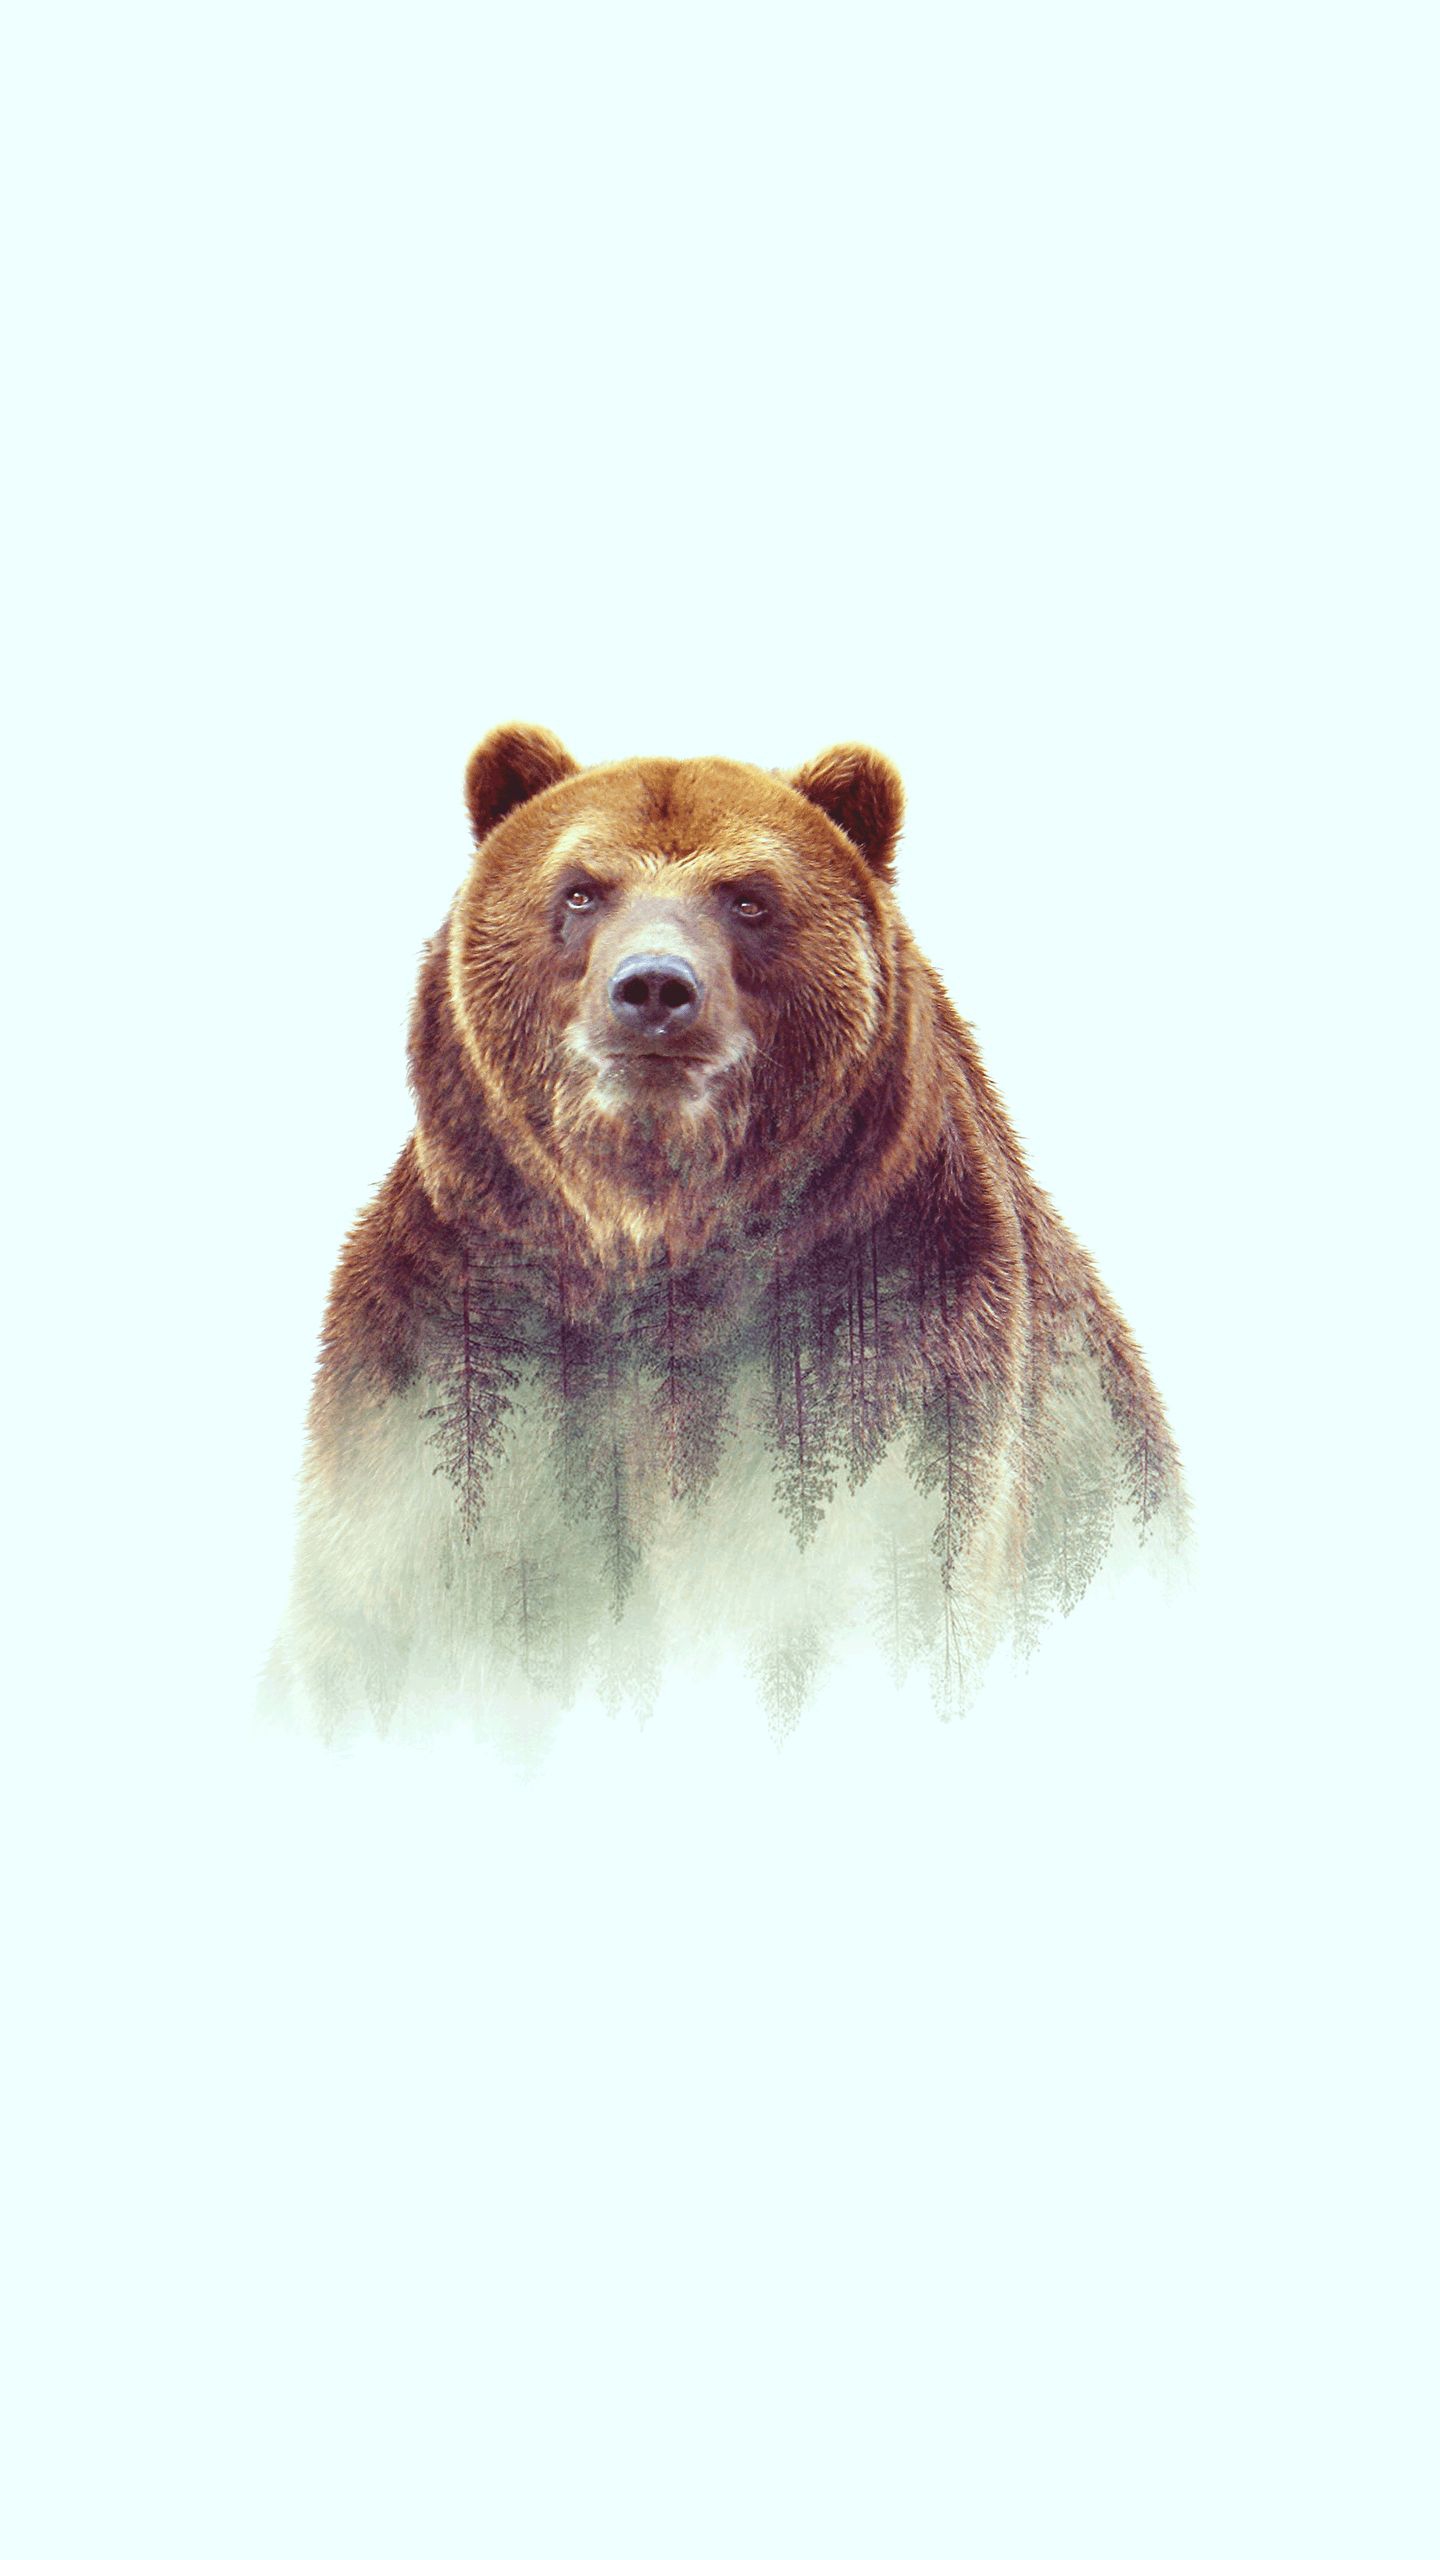 Grizzly Bear Art IPhone Wallpaper   IPhone Wallpapers iPhone